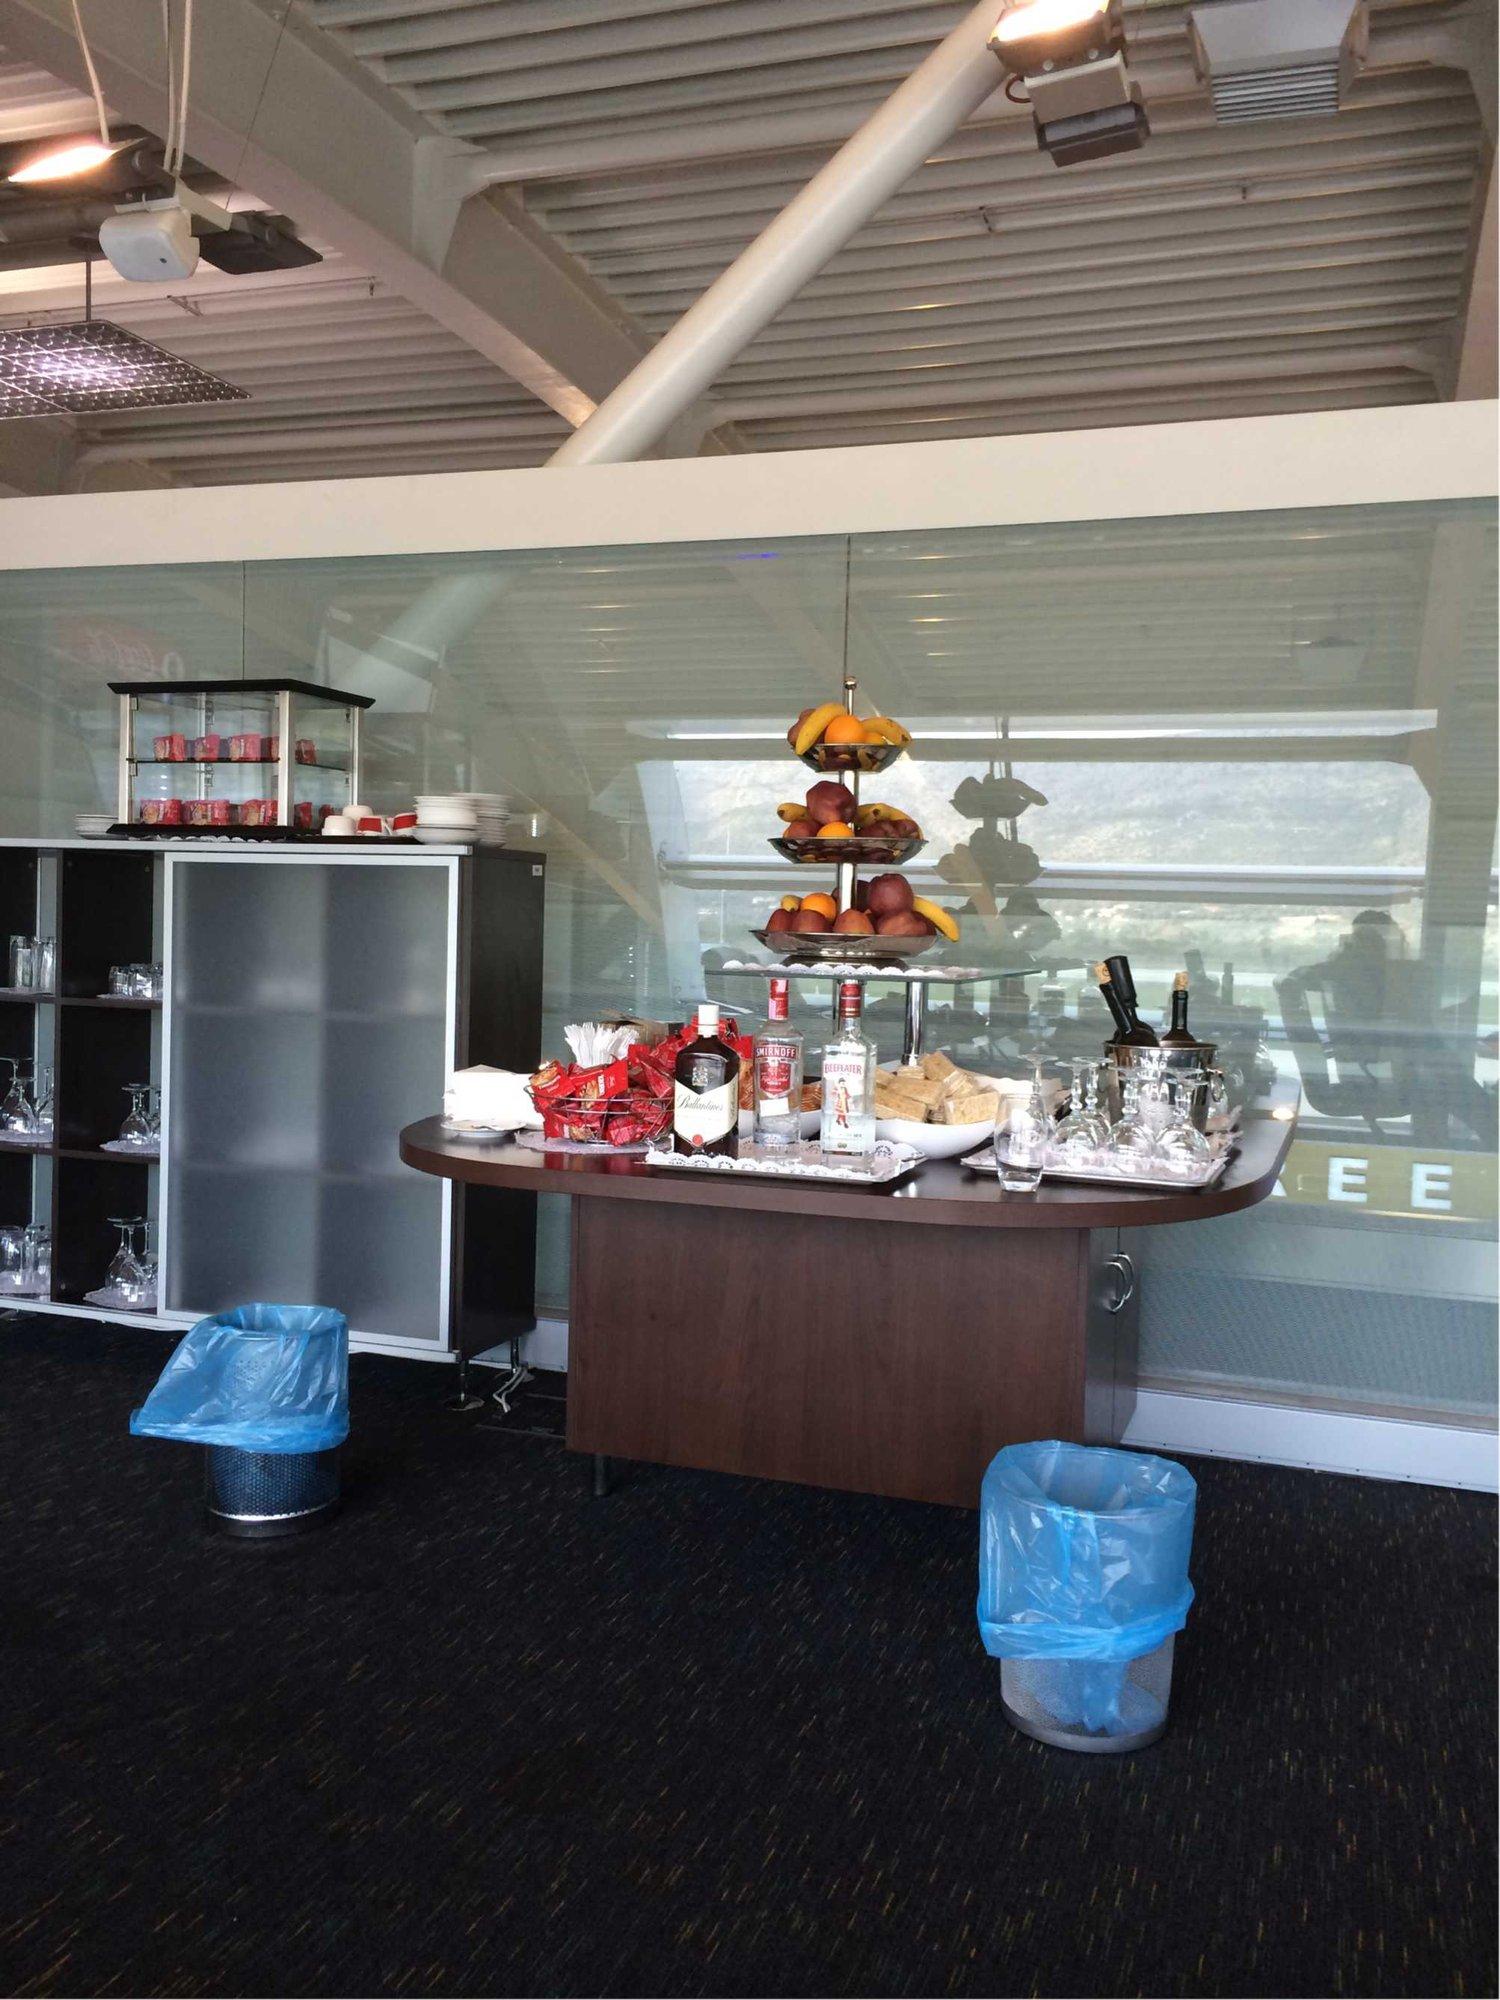 Airport Business Lounge image 18 of 20